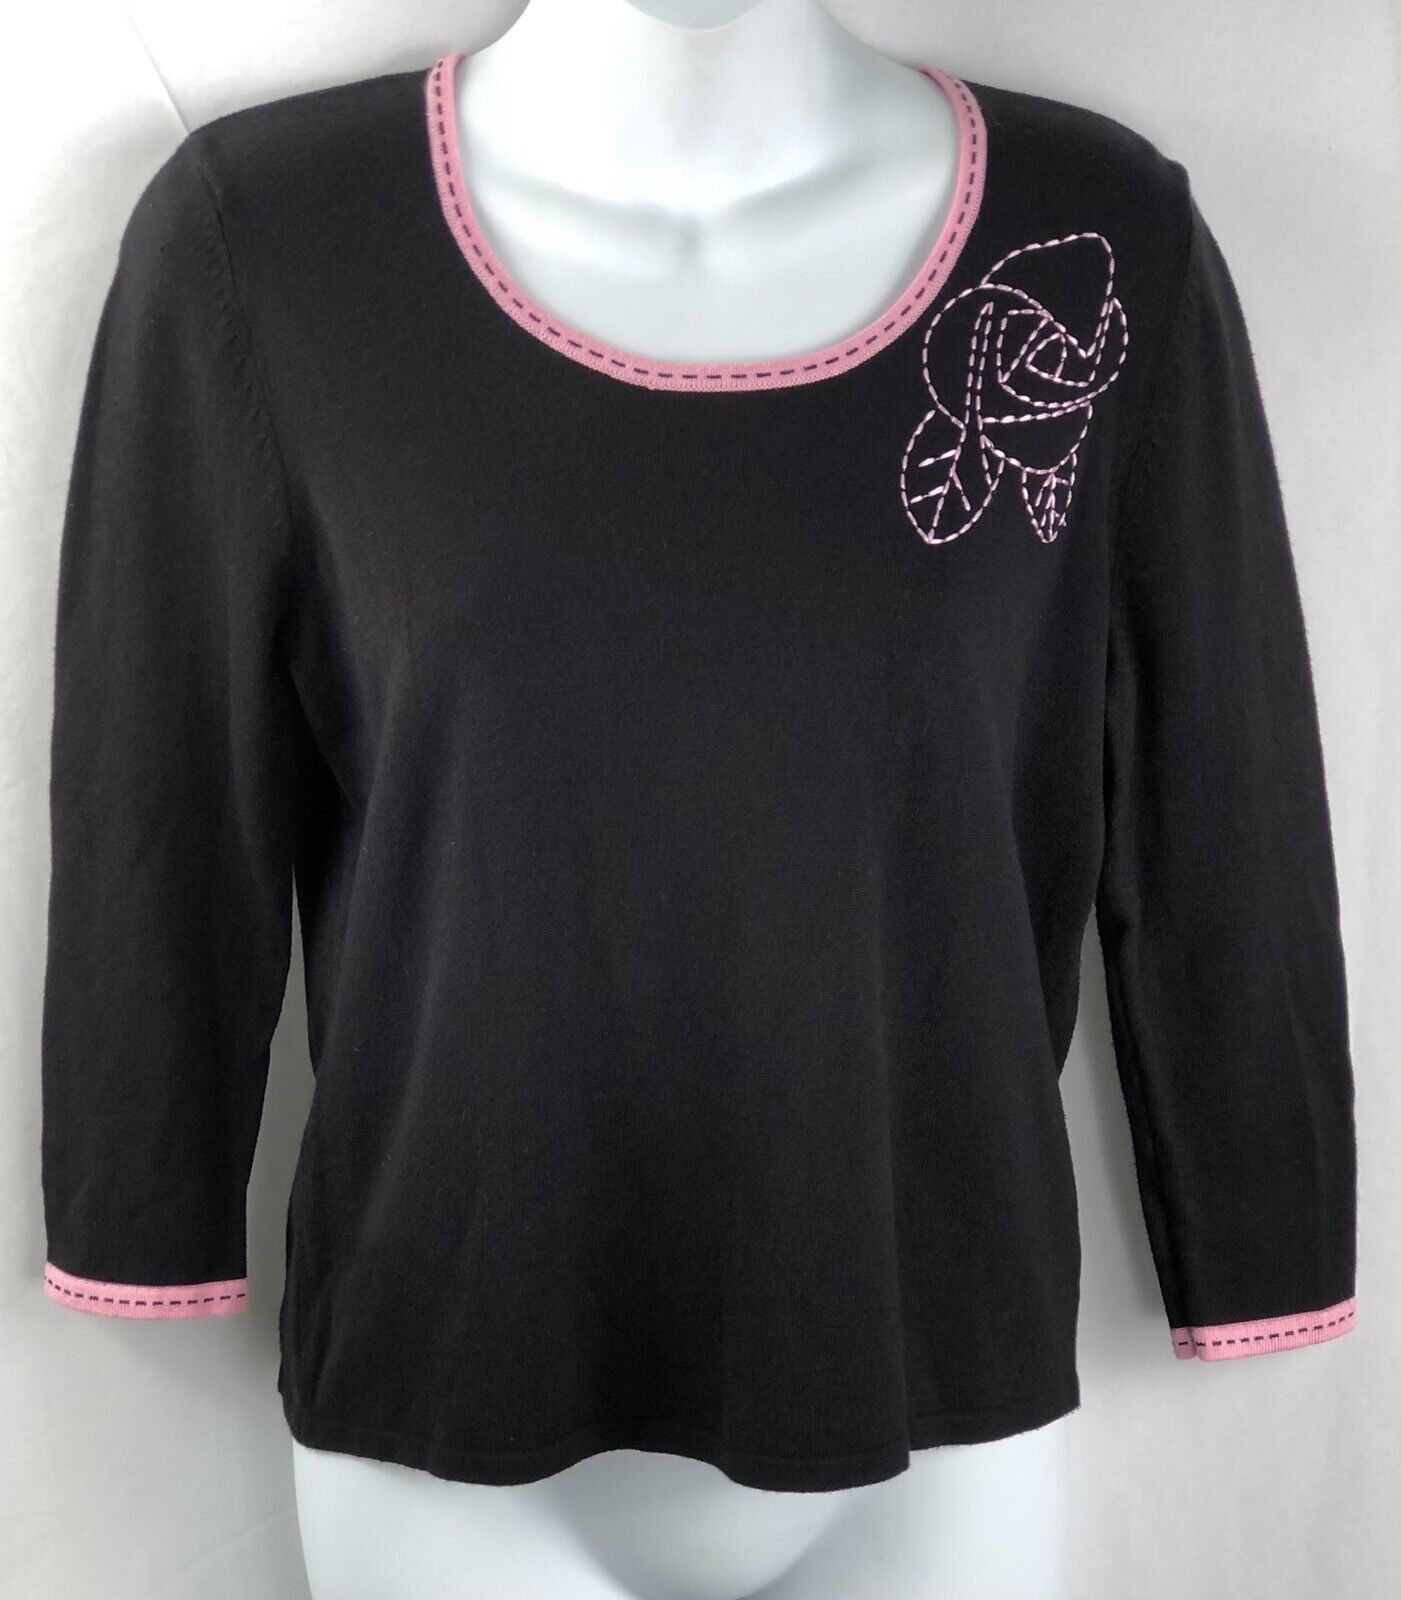 Vintage Requirements Knit Top S Blk/Pink Embroidered 3/4 Sleeve Babydoll  90s Y2K